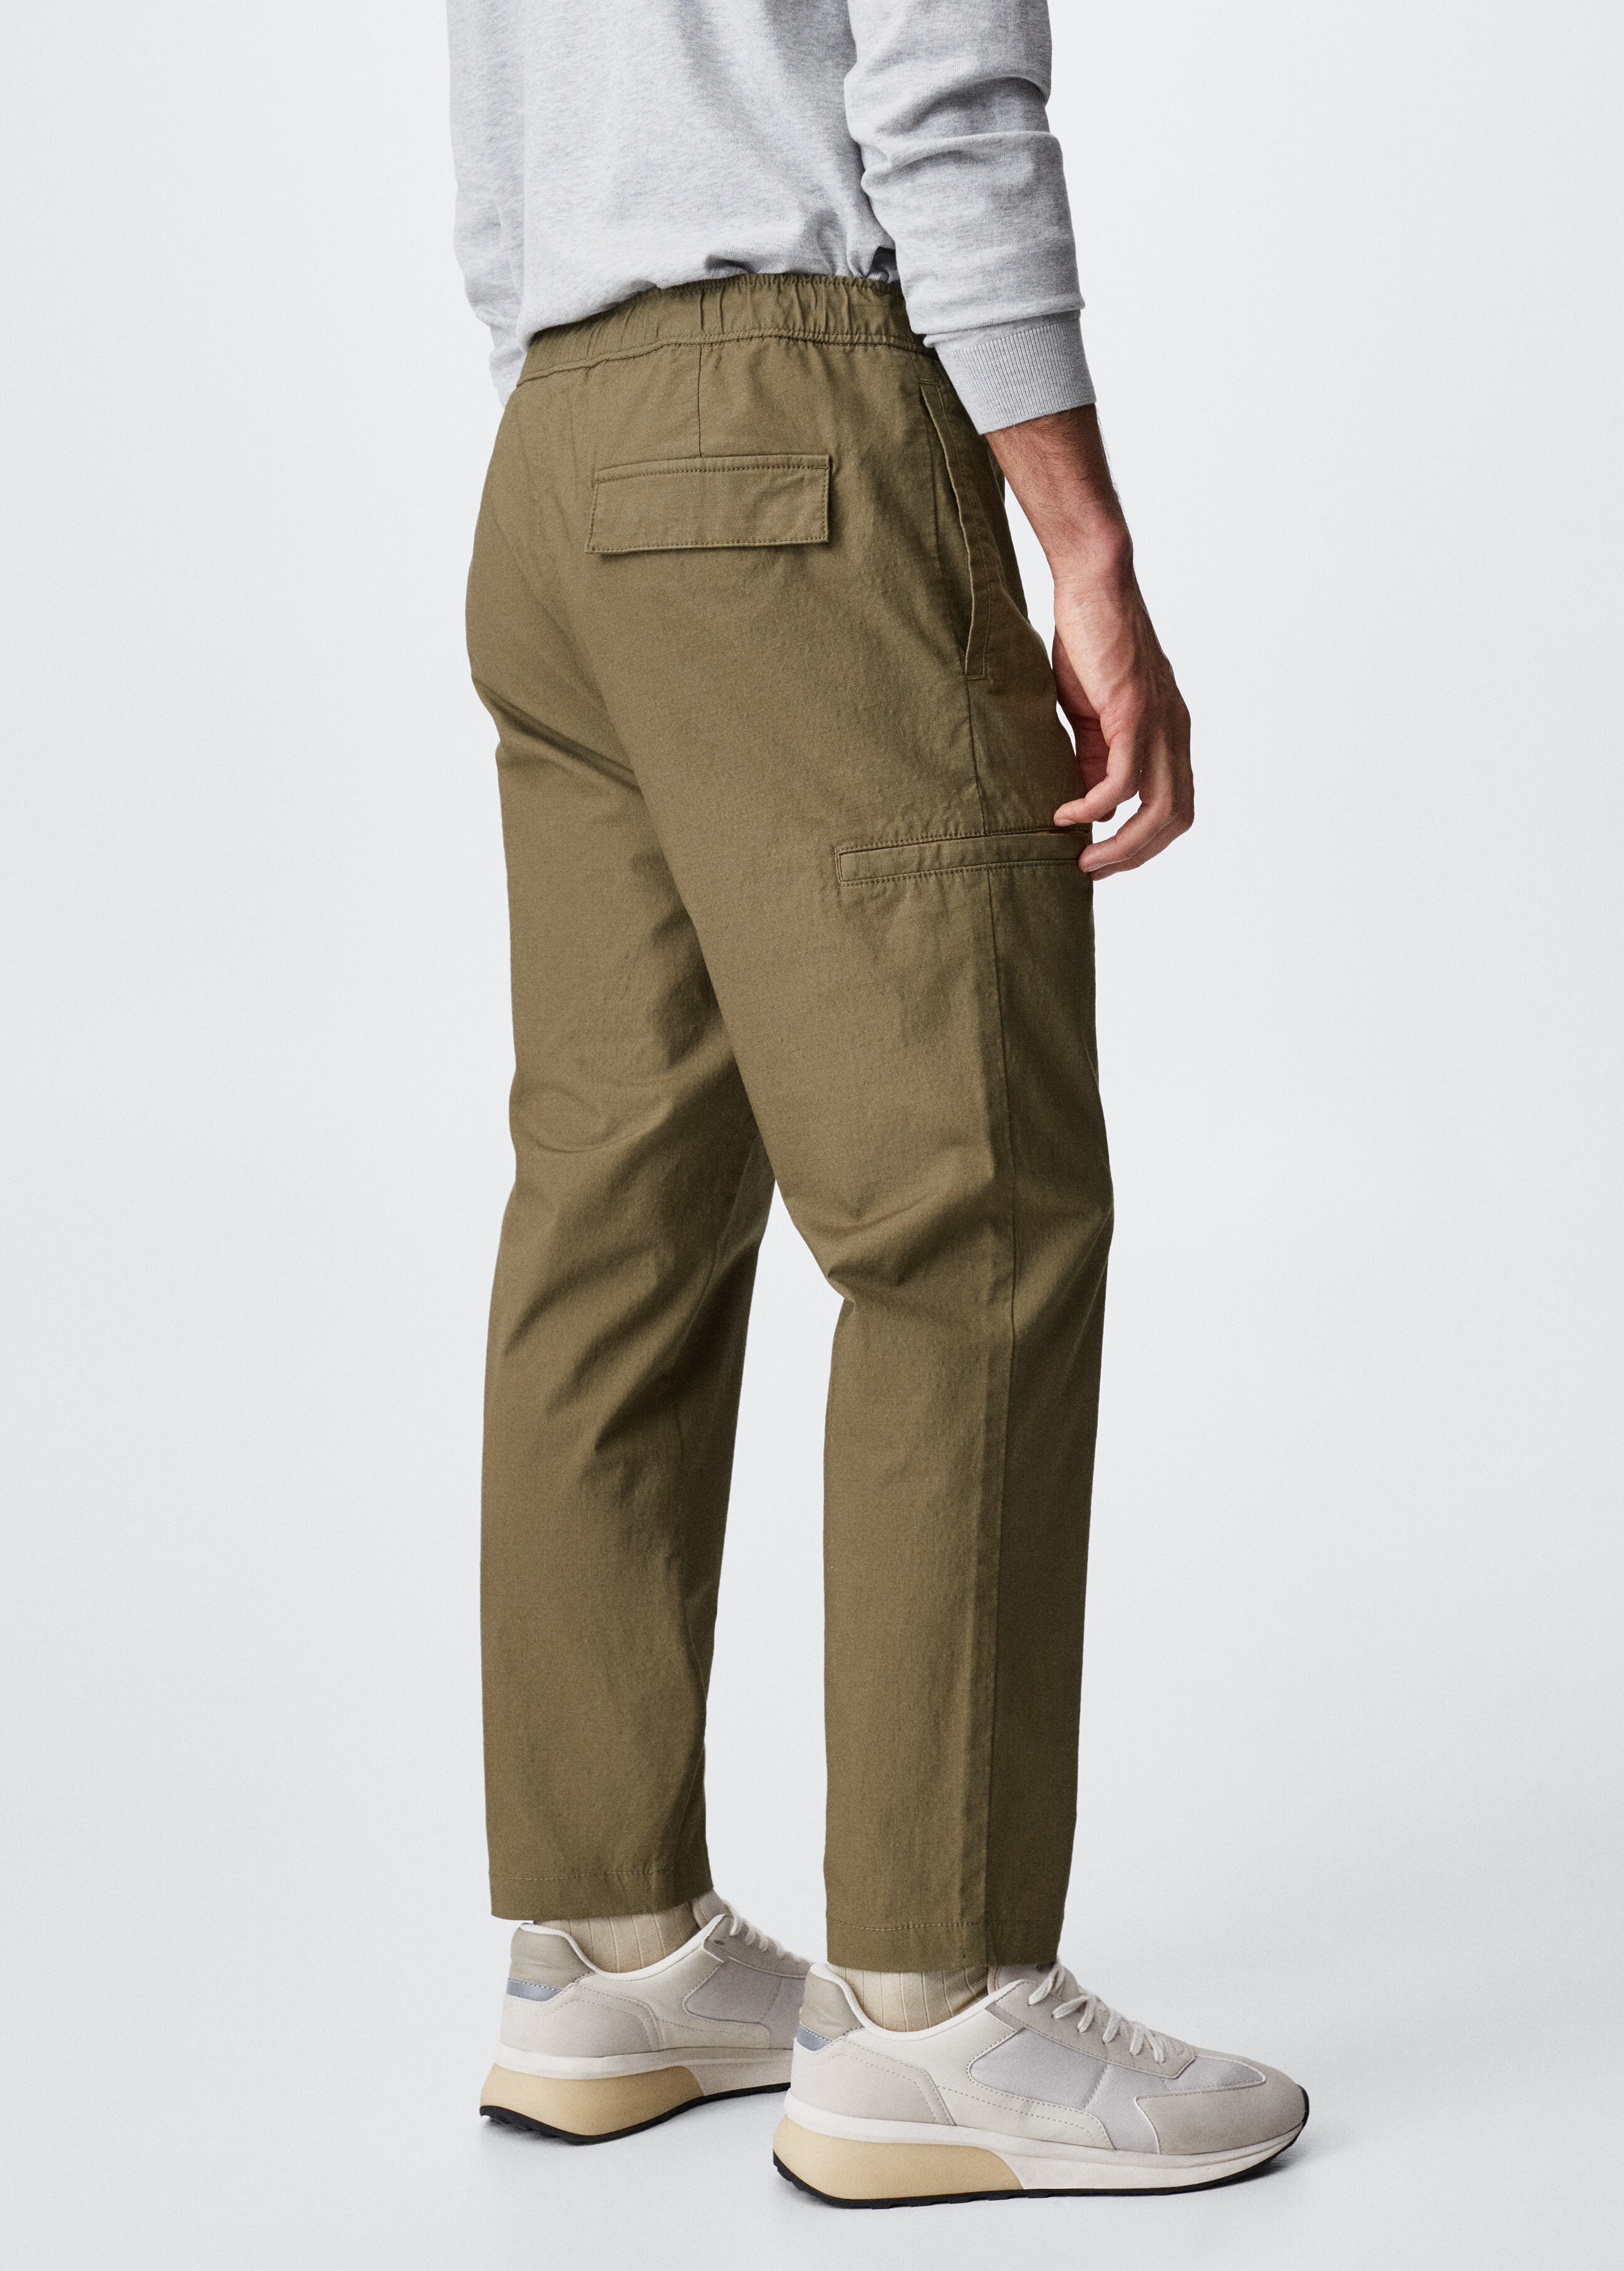 Pocket jogger trousers - Reverse of the article